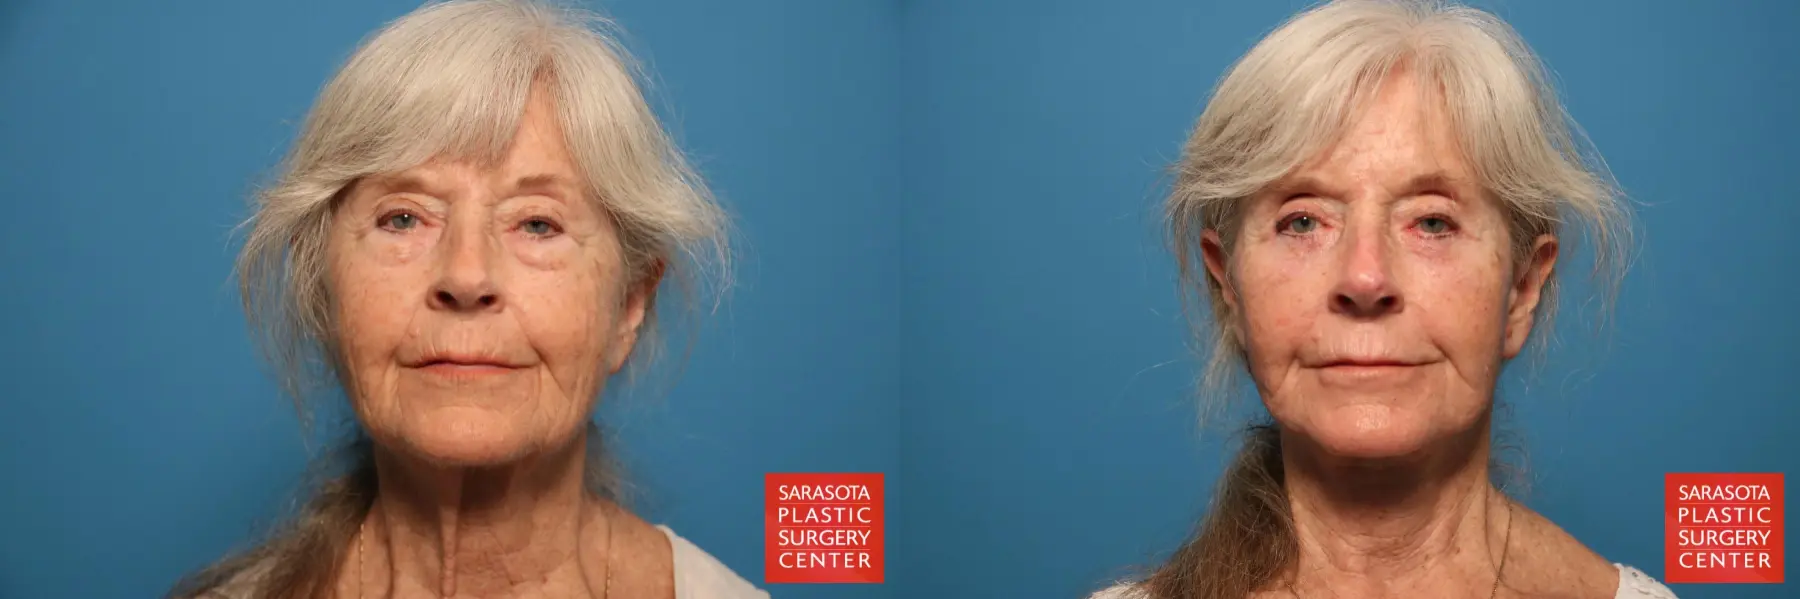 Facelift Revision: Patient 1 - Before and After 1